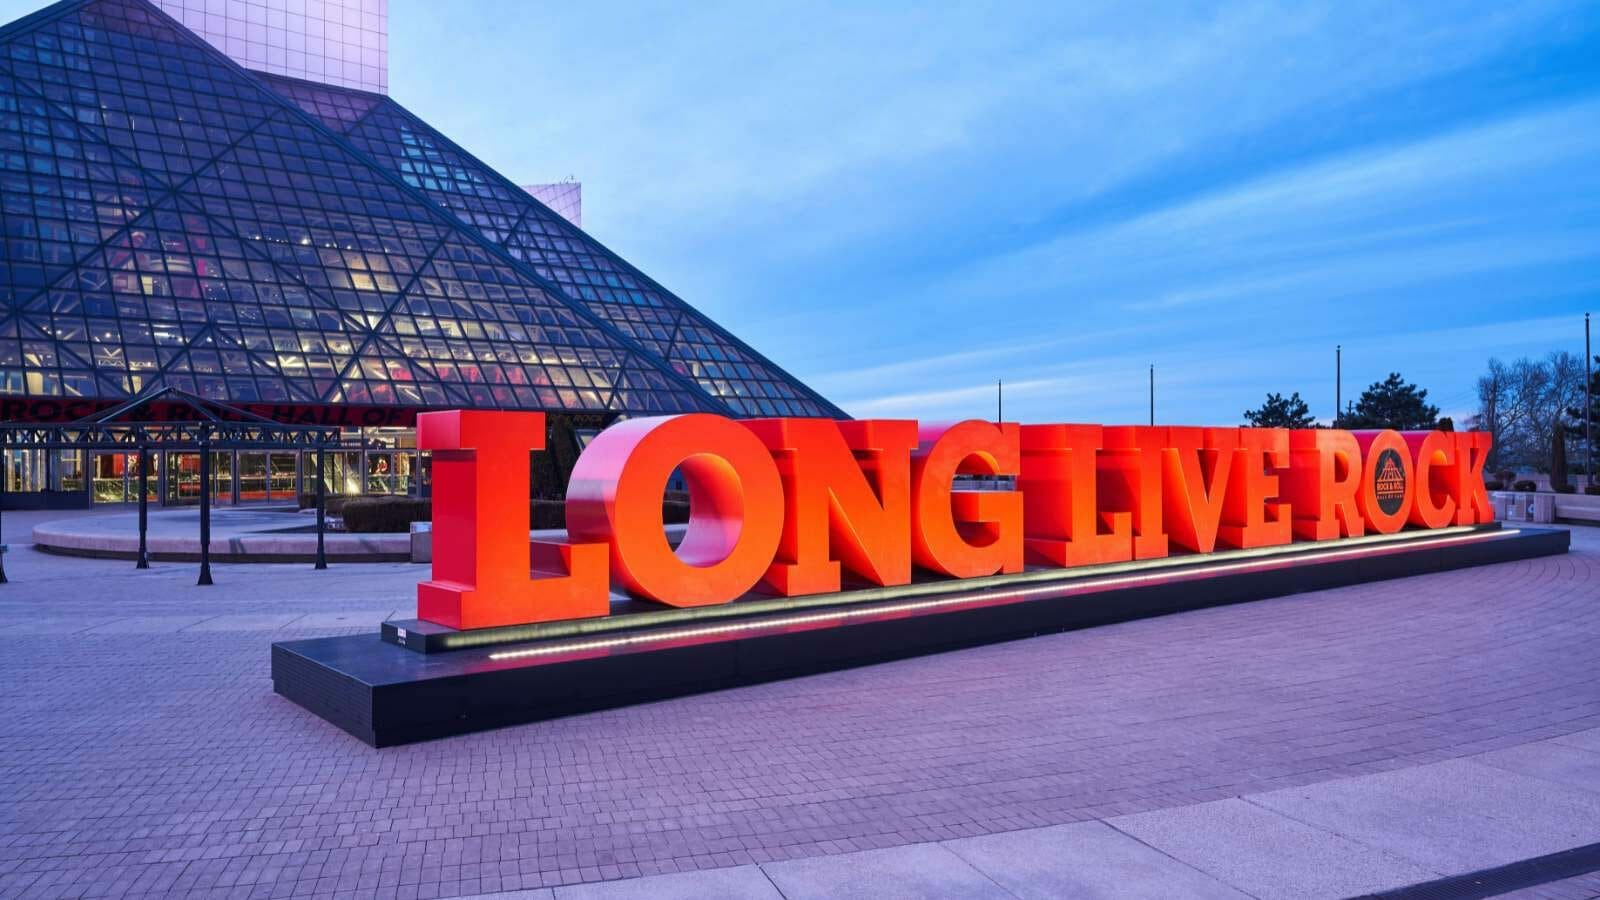 <p>The Rock and Roll Hall of Fame Museum opened on September 2nd, 1995, and is dedicated to preserving the history of rock and roll music. It’s a must-see for any music lover.</p>